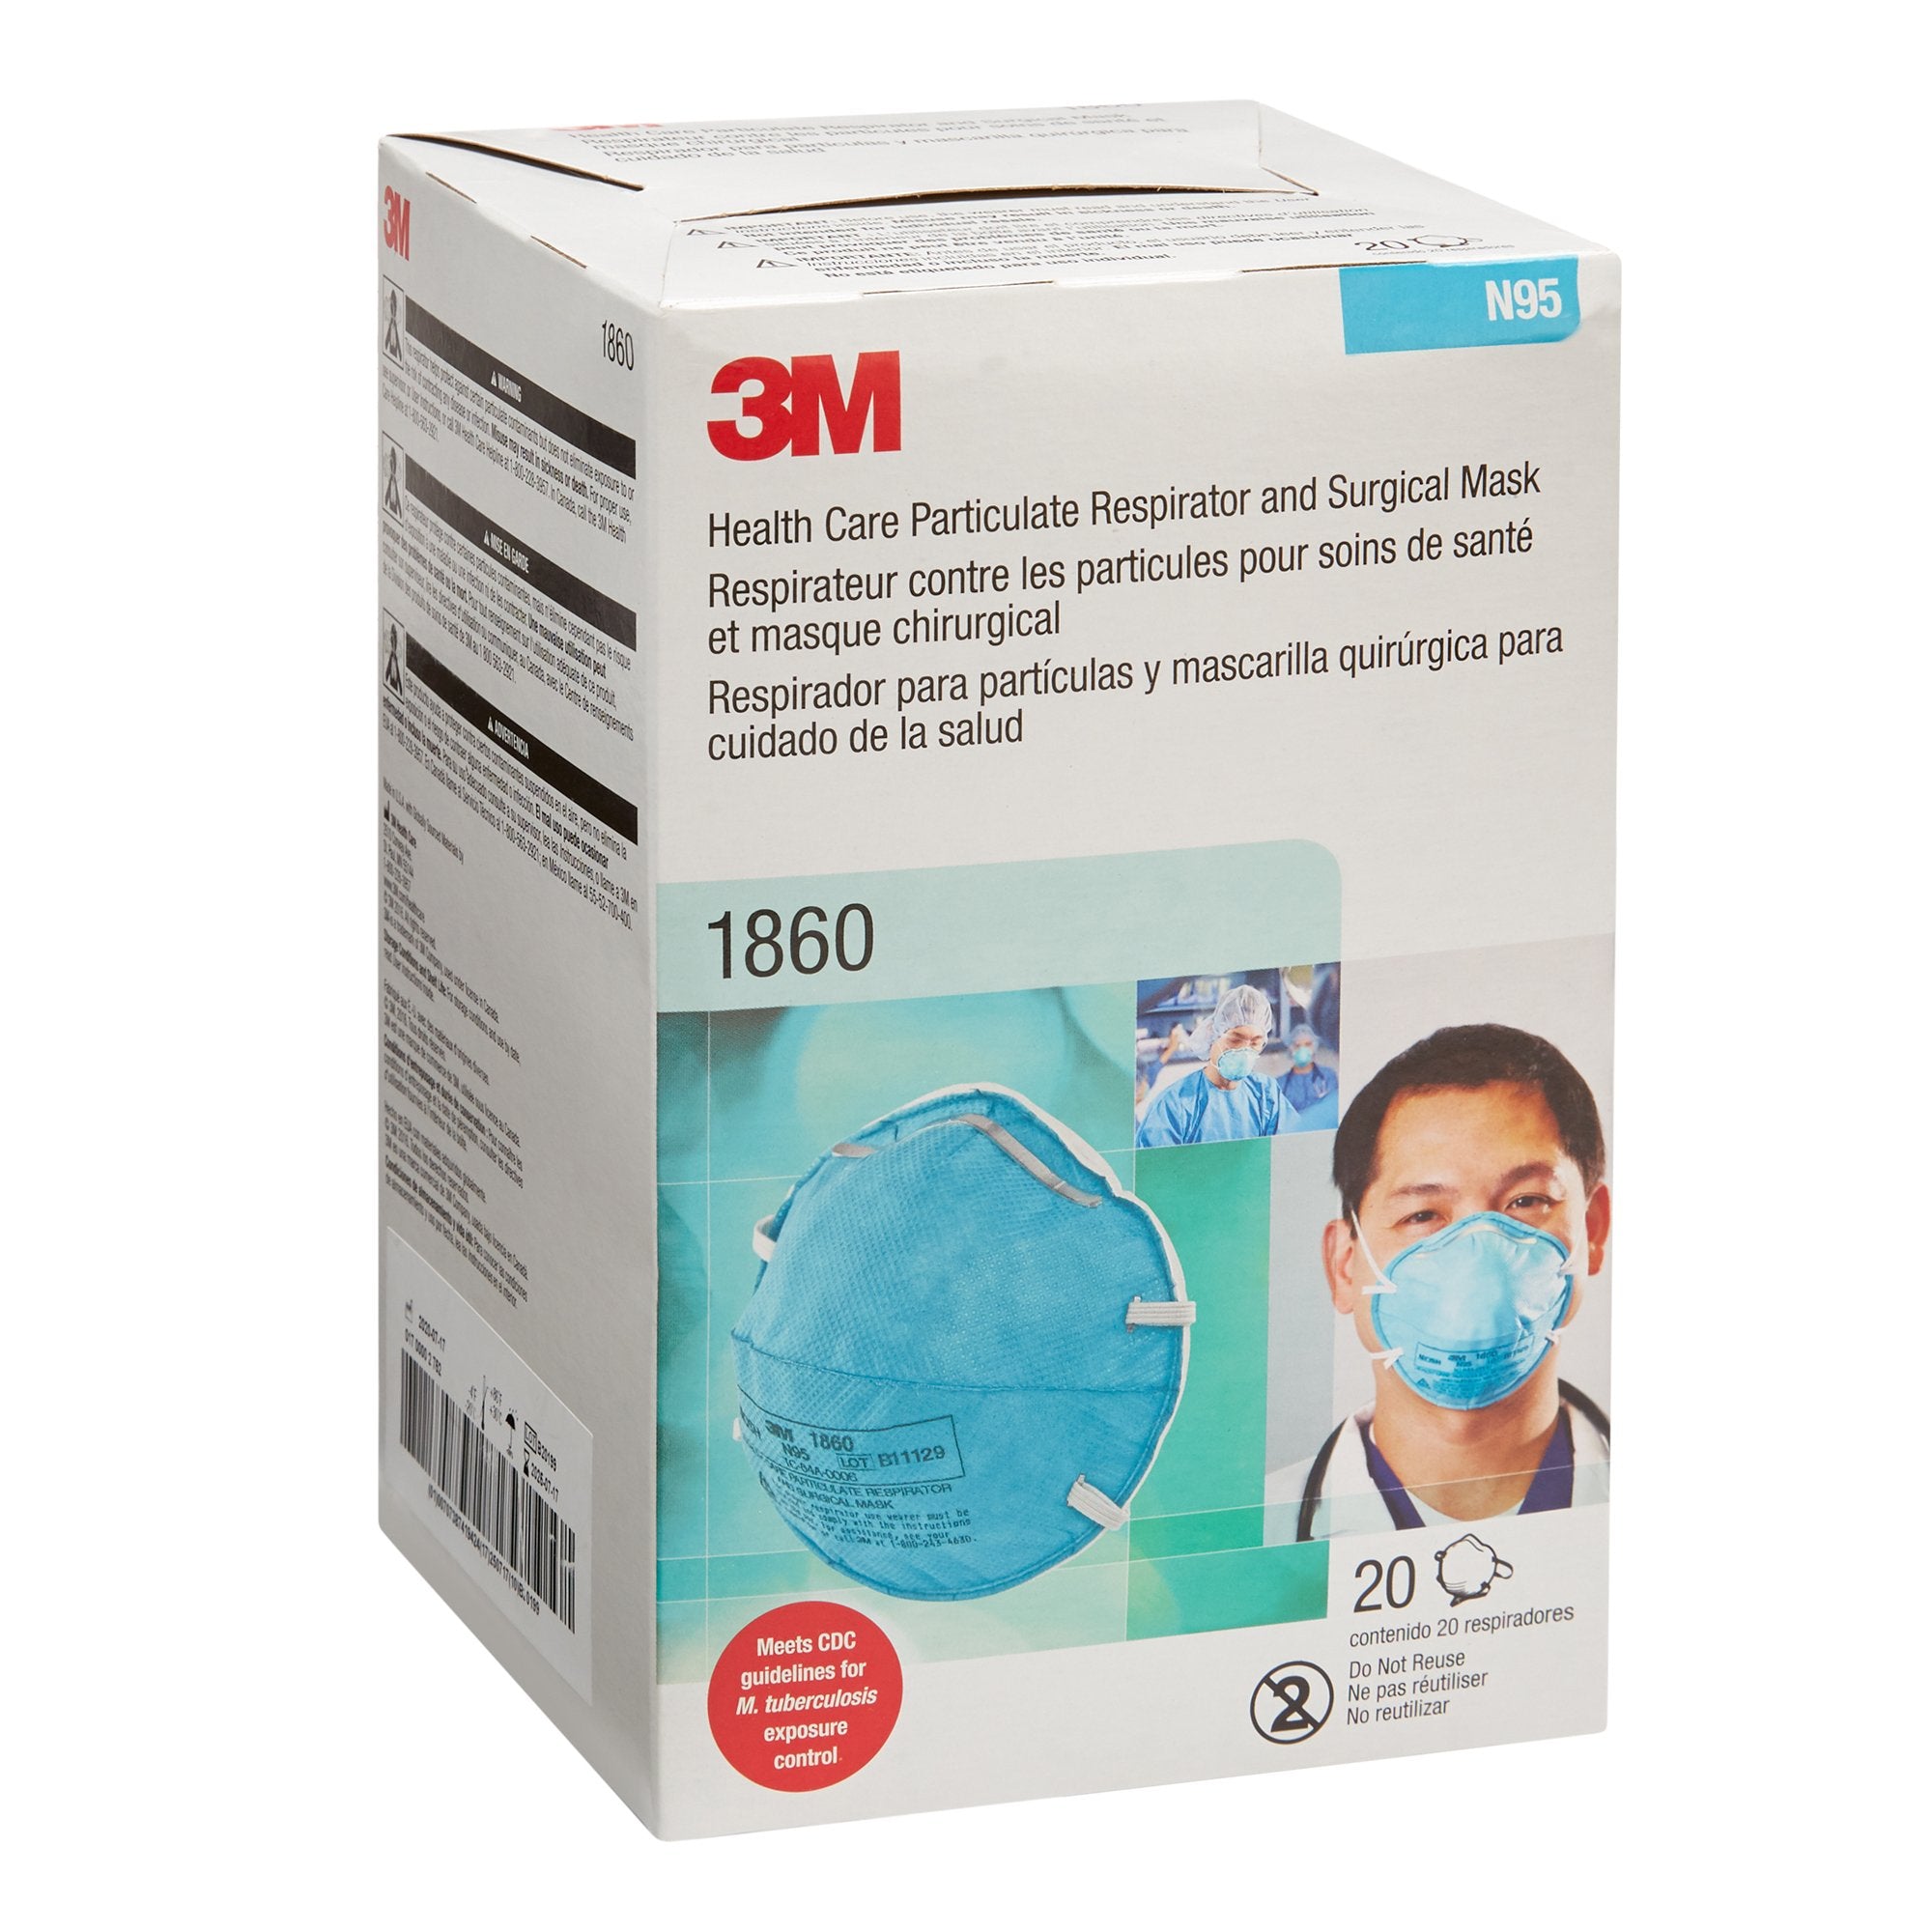 Particulate Respirator / Surgical Mask 3M Medical N95 Cup Elastic Strap One Size Fits Most Blue NonSterile ASTM F1862 Adult